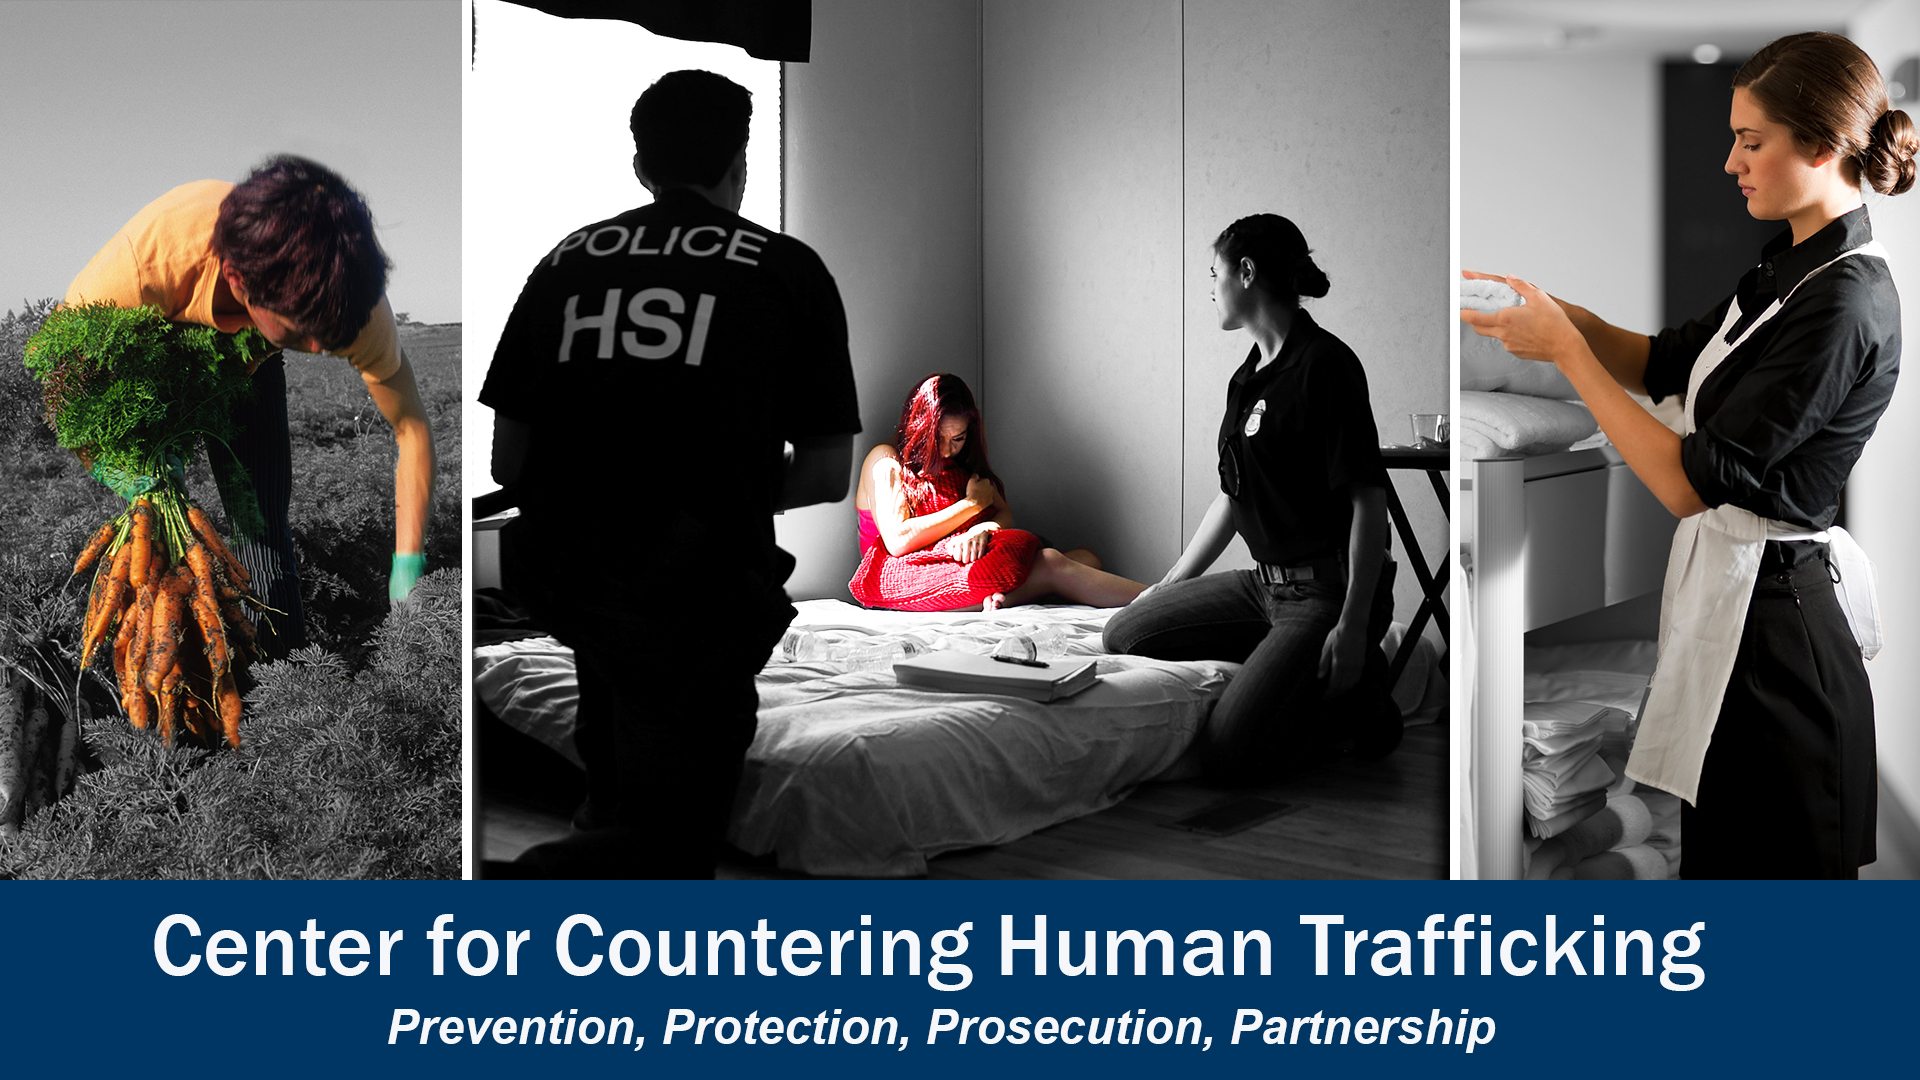 Center for Countering Human Trafficking (CCHT)